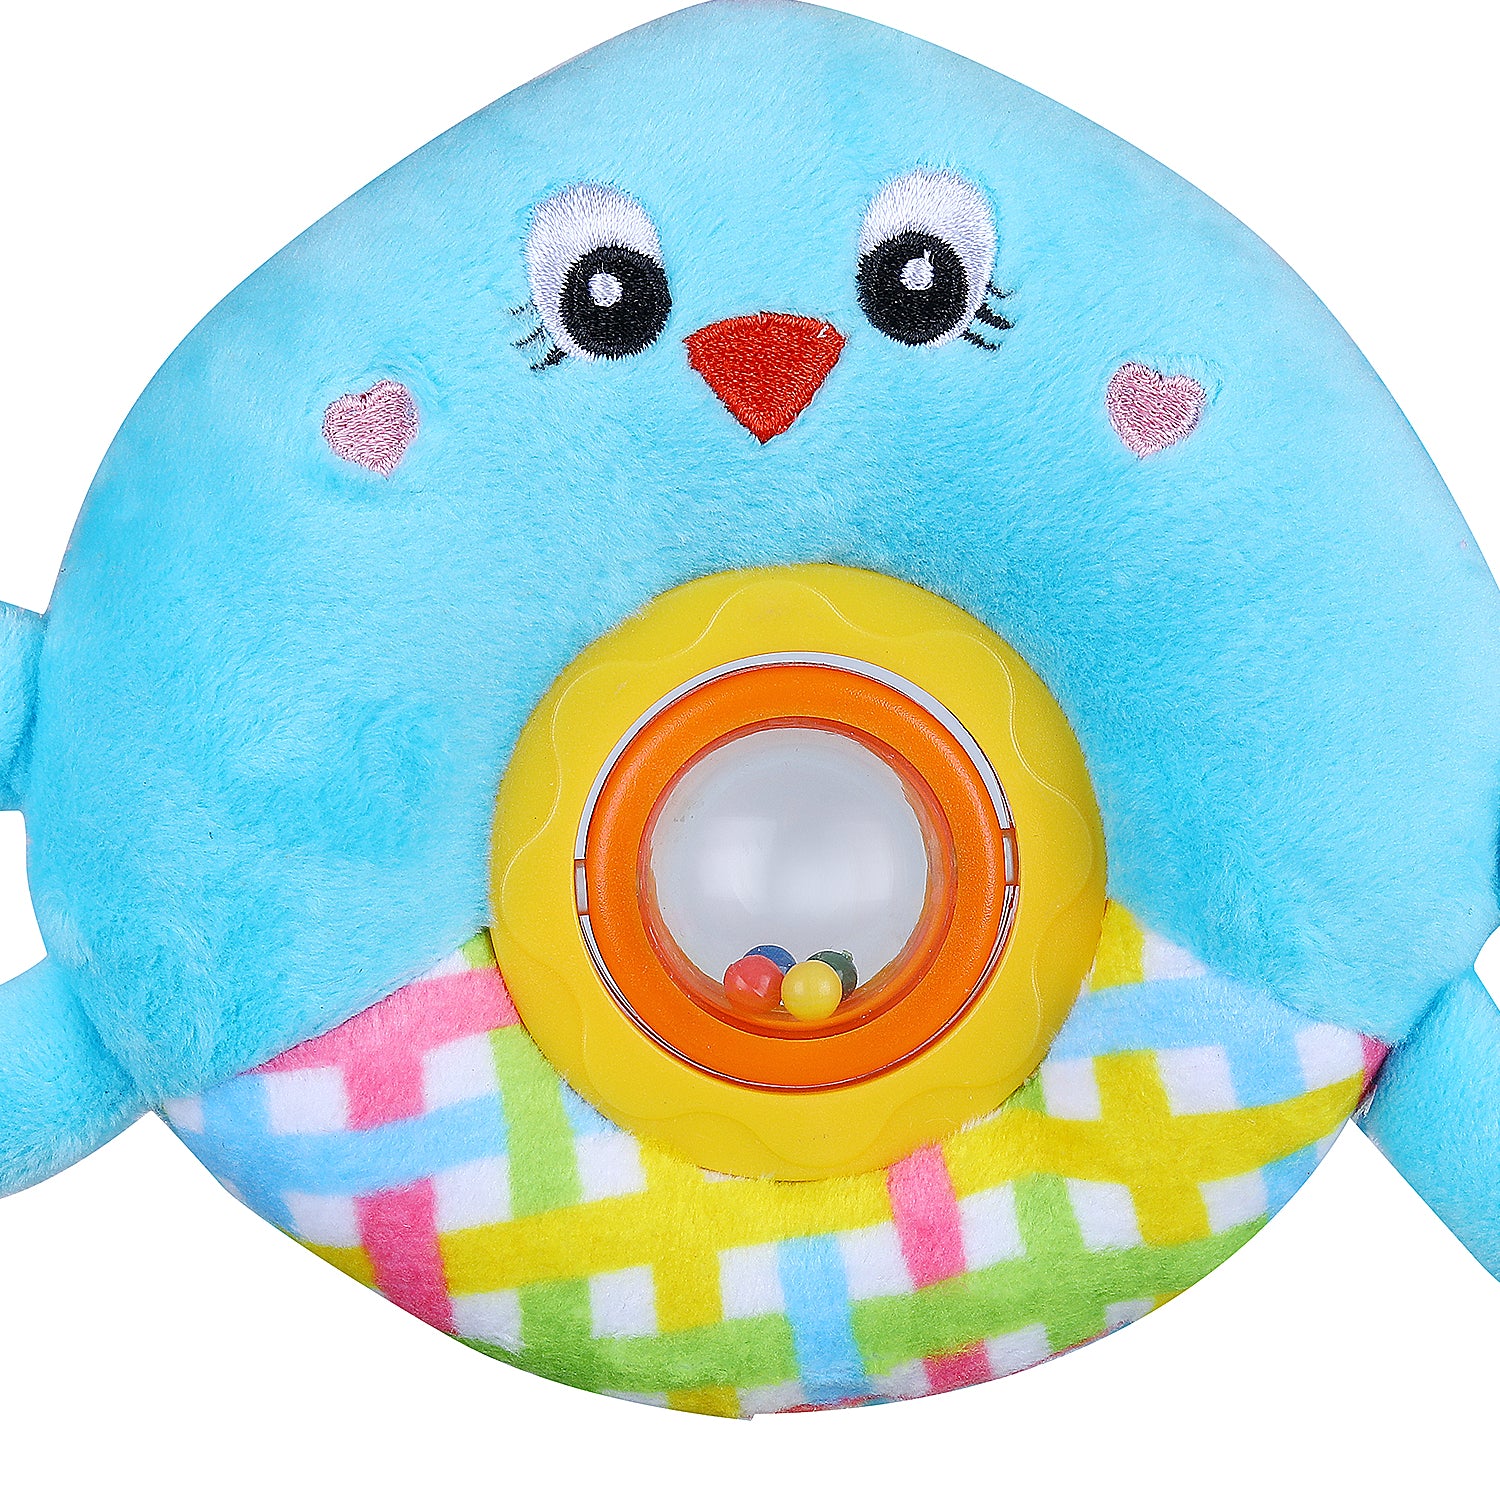 Baby Moo Bird Stroller Crib Hanging Plush Rattle Toy With Teether - Blue